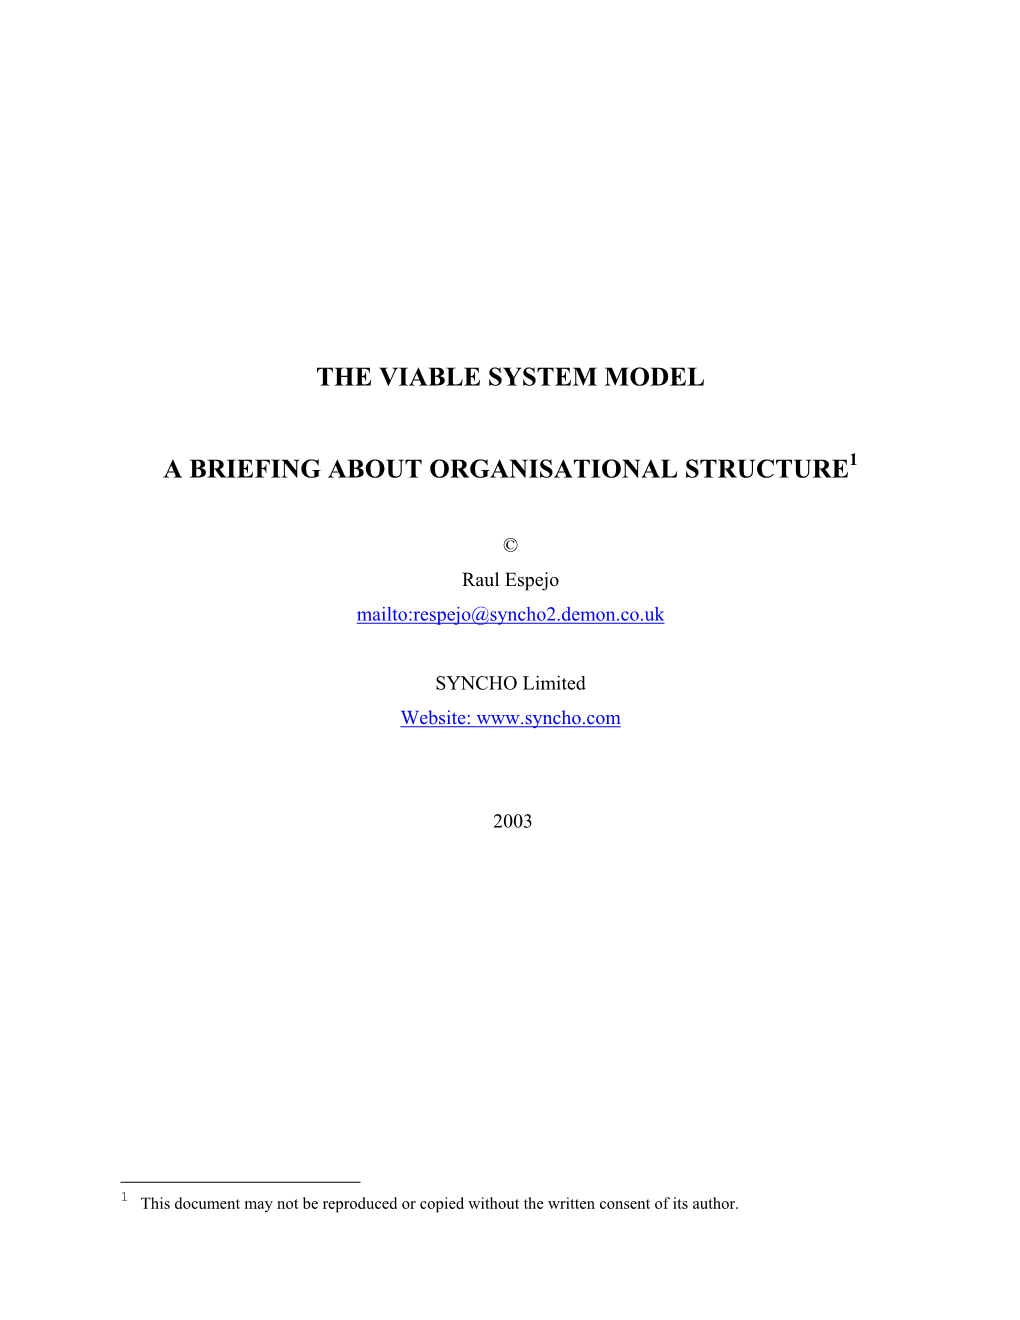 Introduction to the Viable System Model